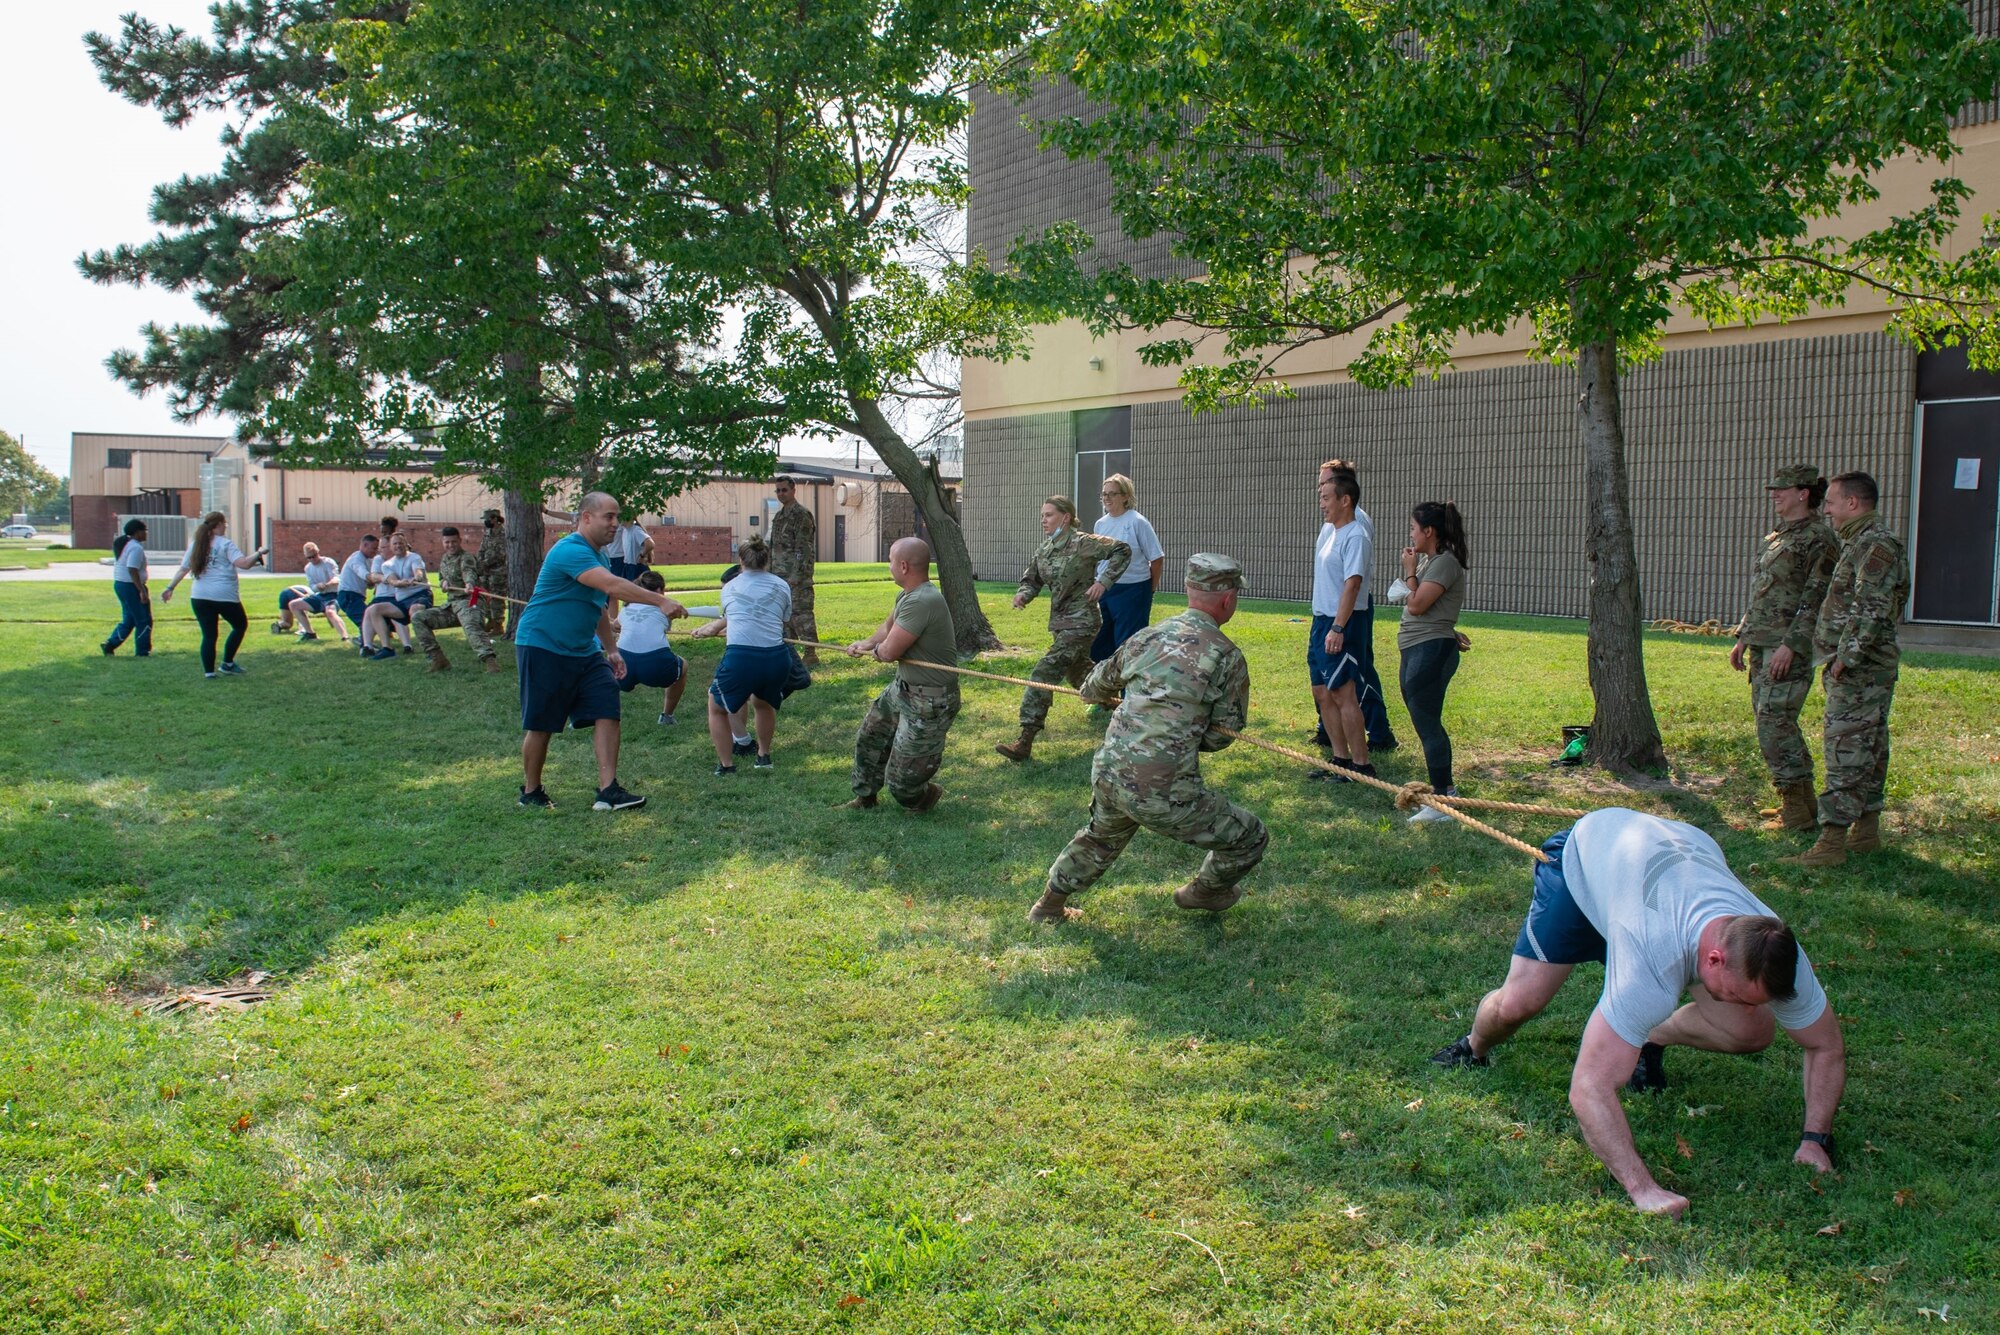 Members of the 932nd Medical Group participate in the tug of war activity during their annual sexual assault prevention and response/suicide prevention training, Scott Air Force Base, Illinois, Sept. 12, 2021. Each activity reviewed the training material, for example during the fit to fight activity a team of airman would be asked a training question and if answered correctly all other groups would do an exercise. (U.S. Air Force Photo by Staff Sgt. Brooke Spenner)